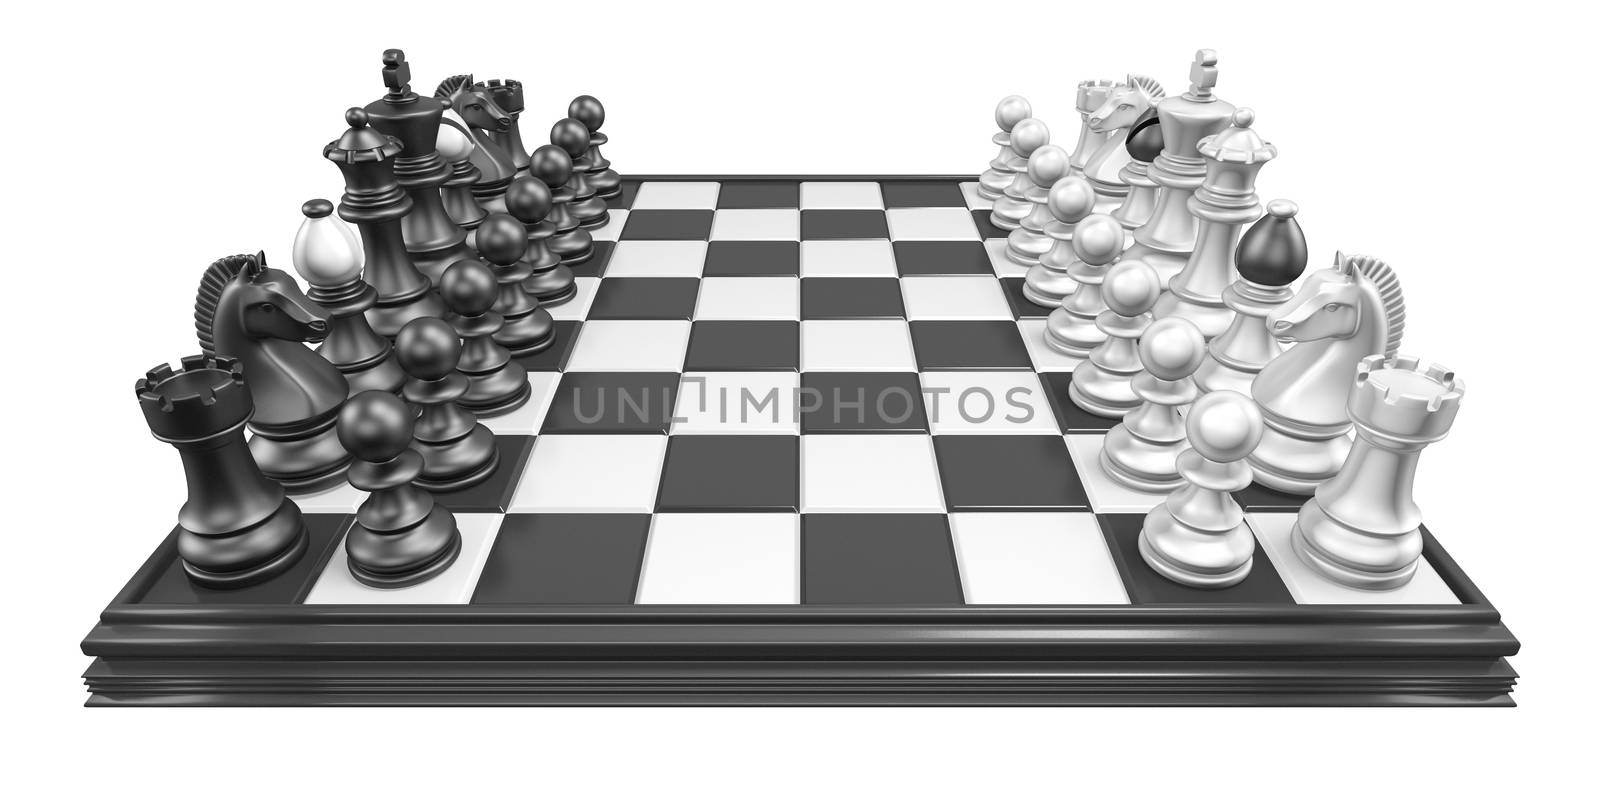 Chess board with all chess pieces 3D render illustration isolated on white background